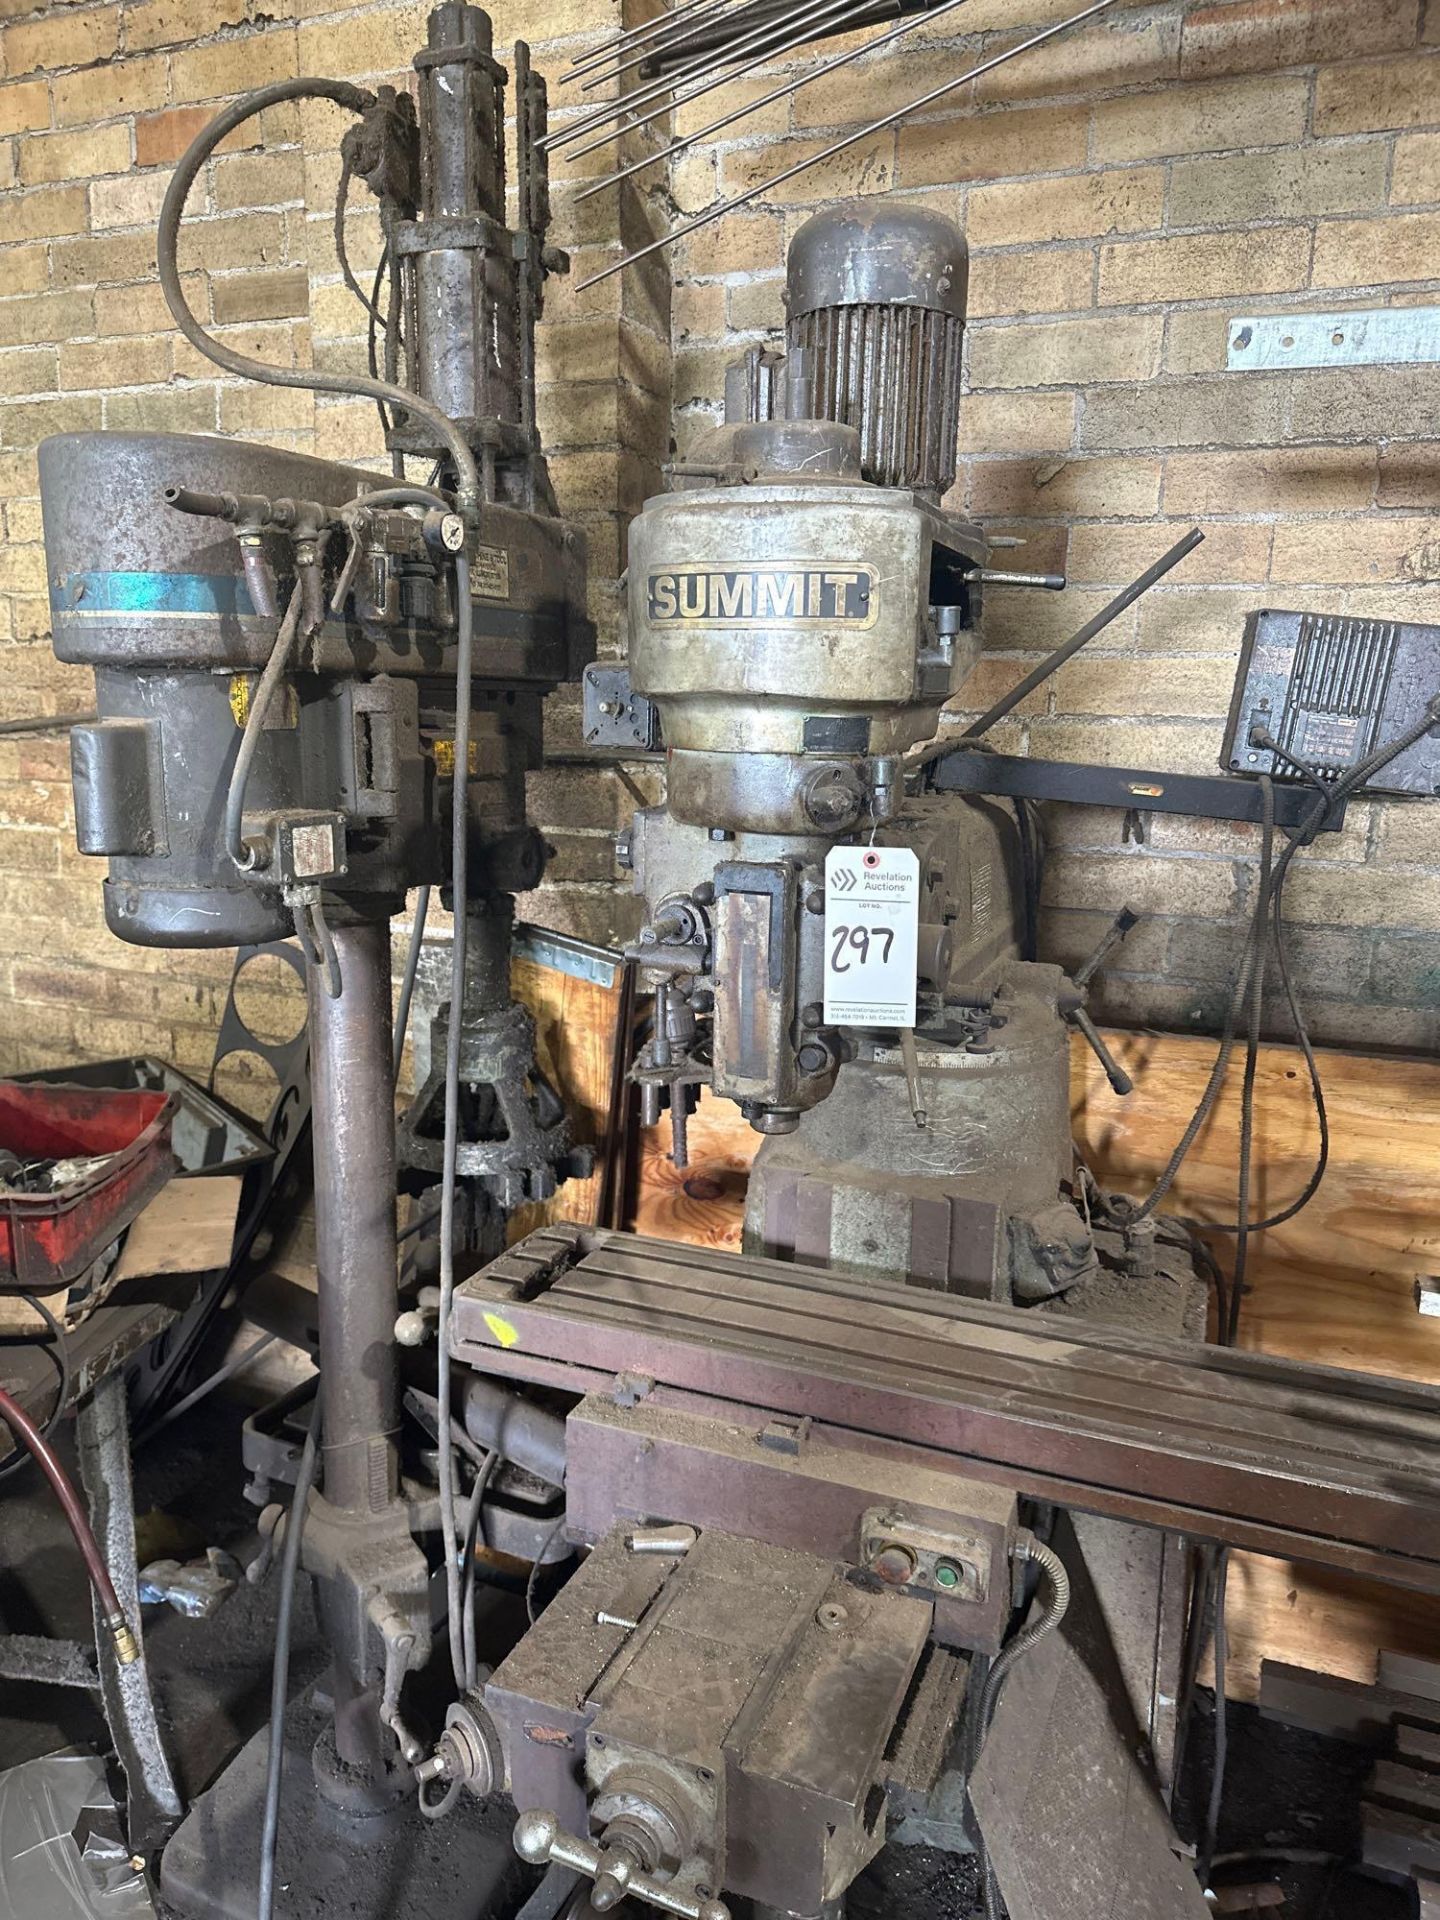 SUMMIT VERTICAL MILLING MACHINE AND DRILL PRESS